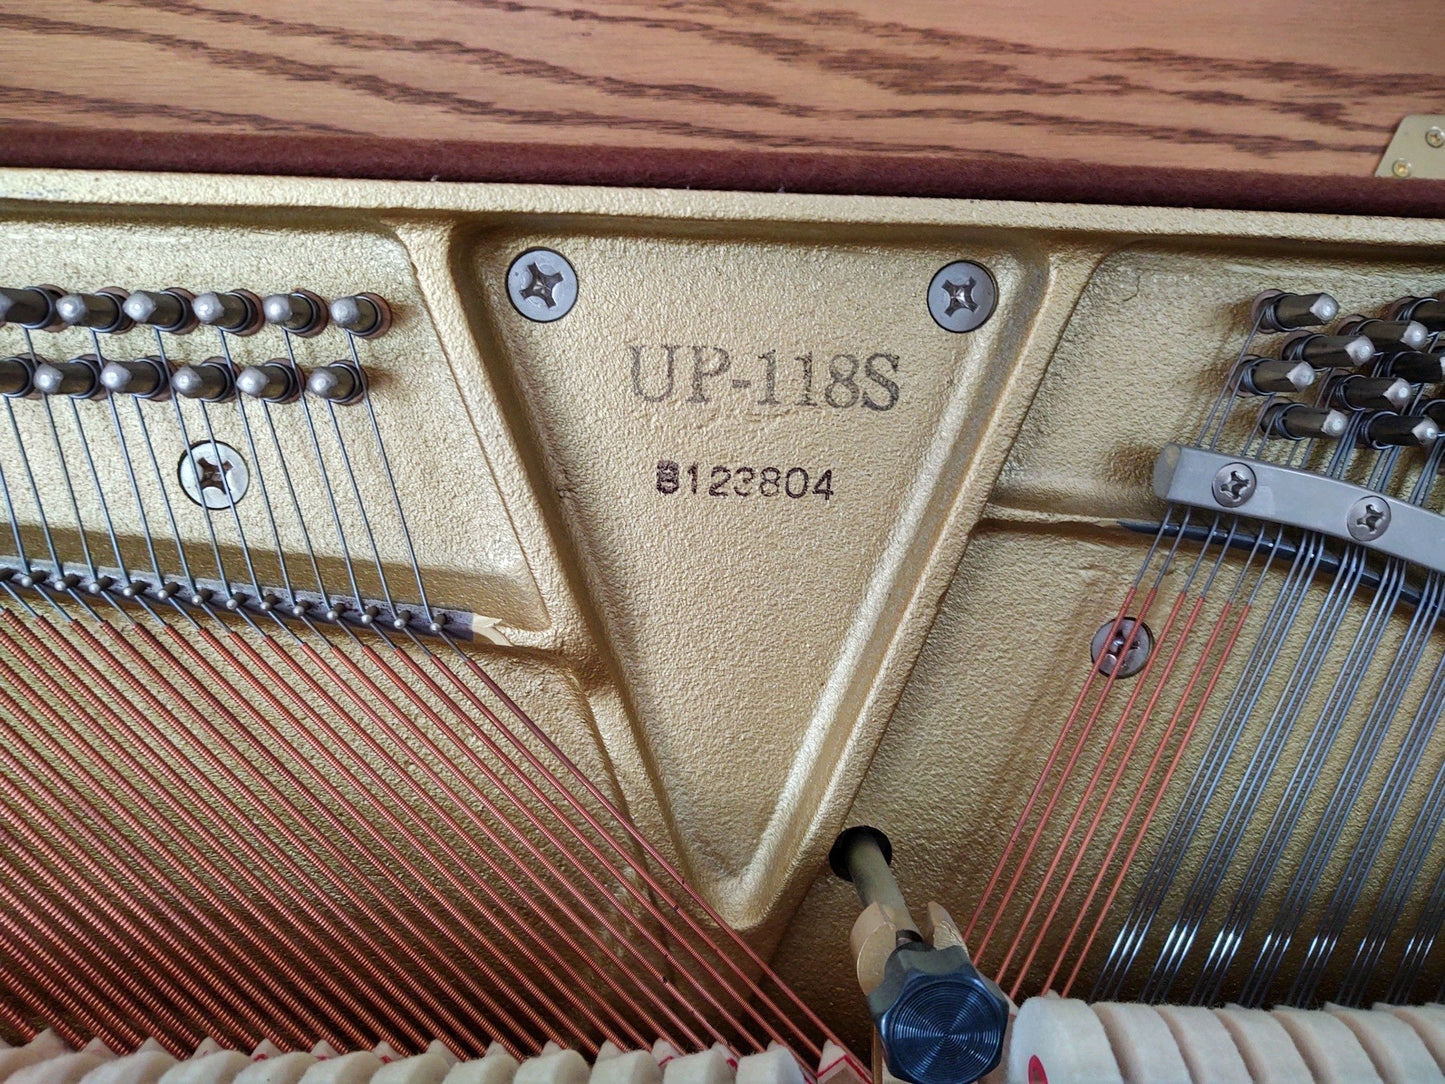 Boston Upright UP118 | Sold New in 2000